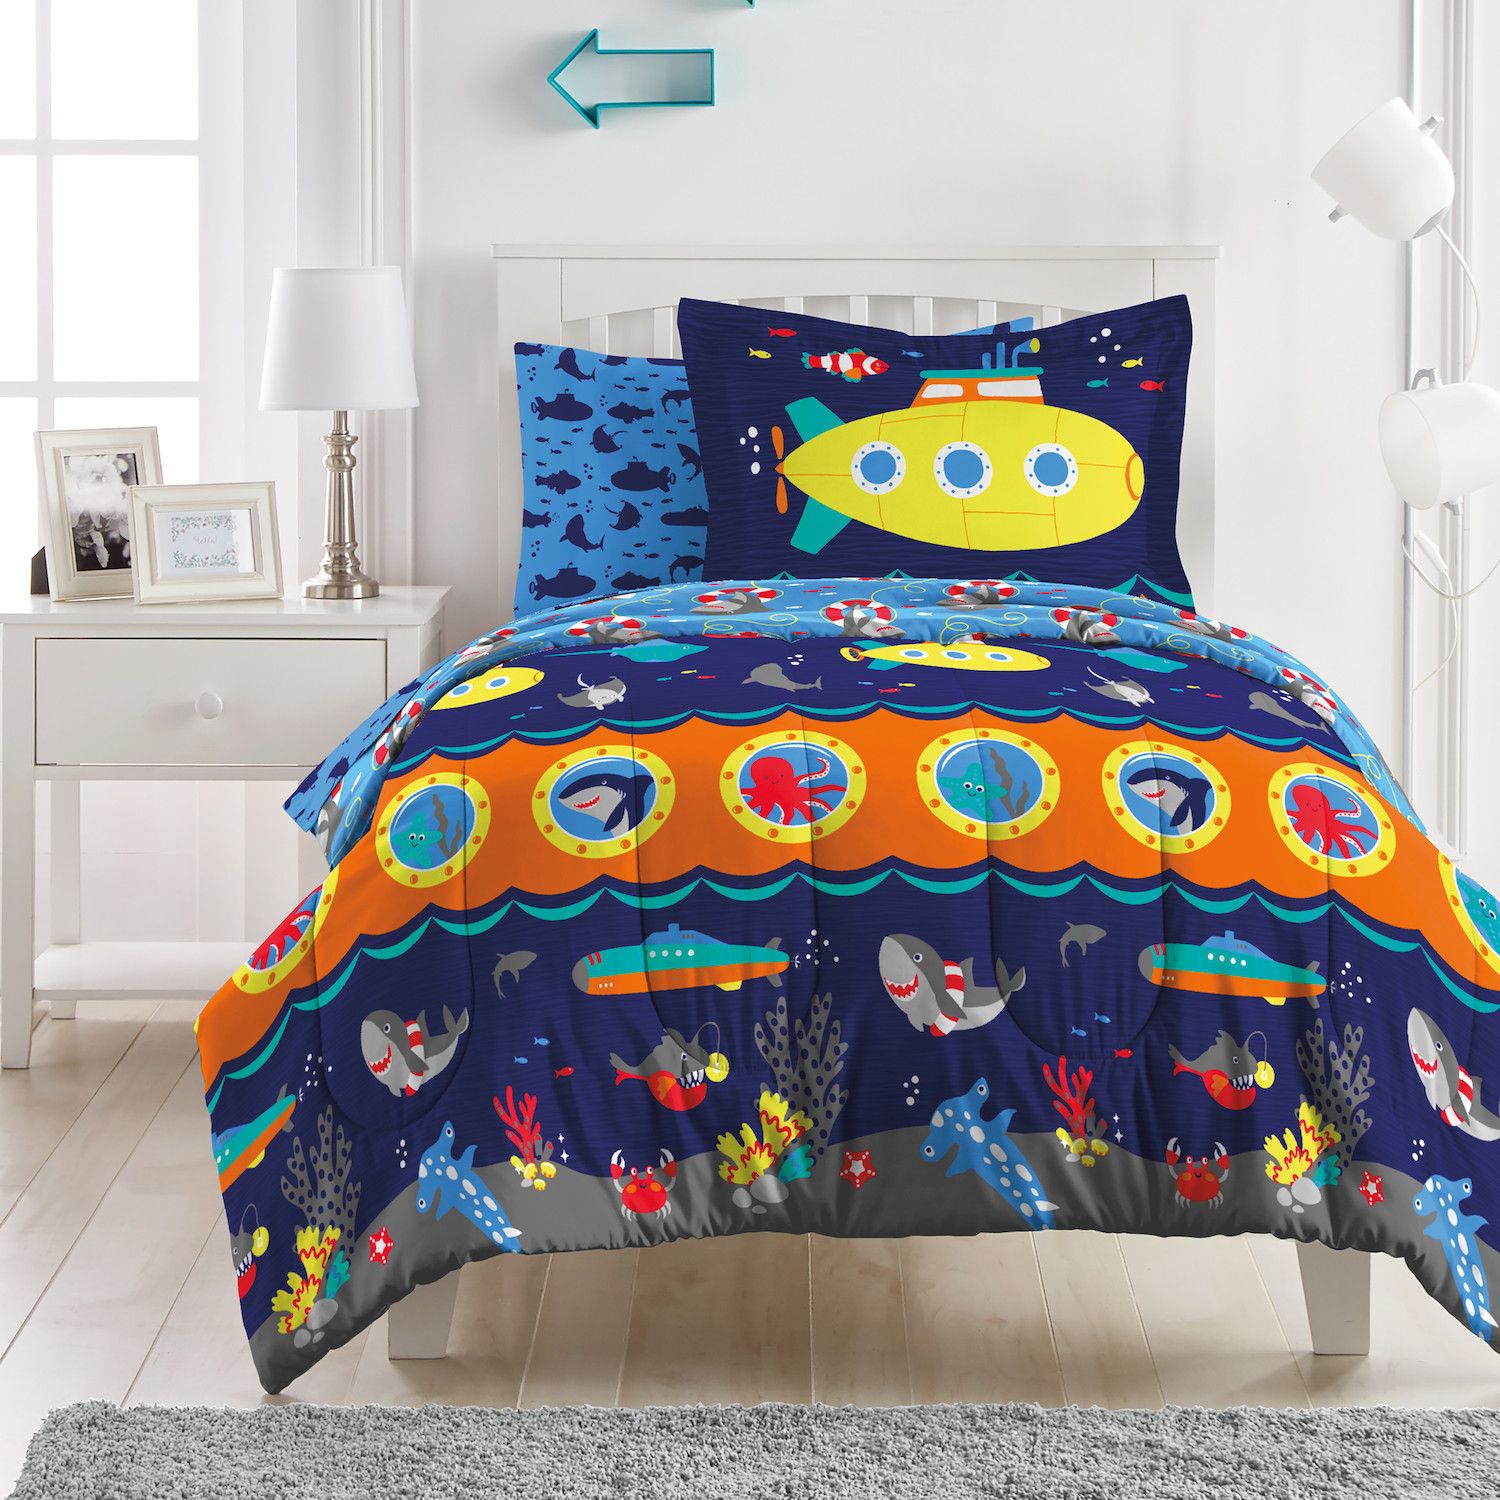 Image for Dream Factory Submarine 7-piece Comforter Set and Sheet Set at Kohl's.